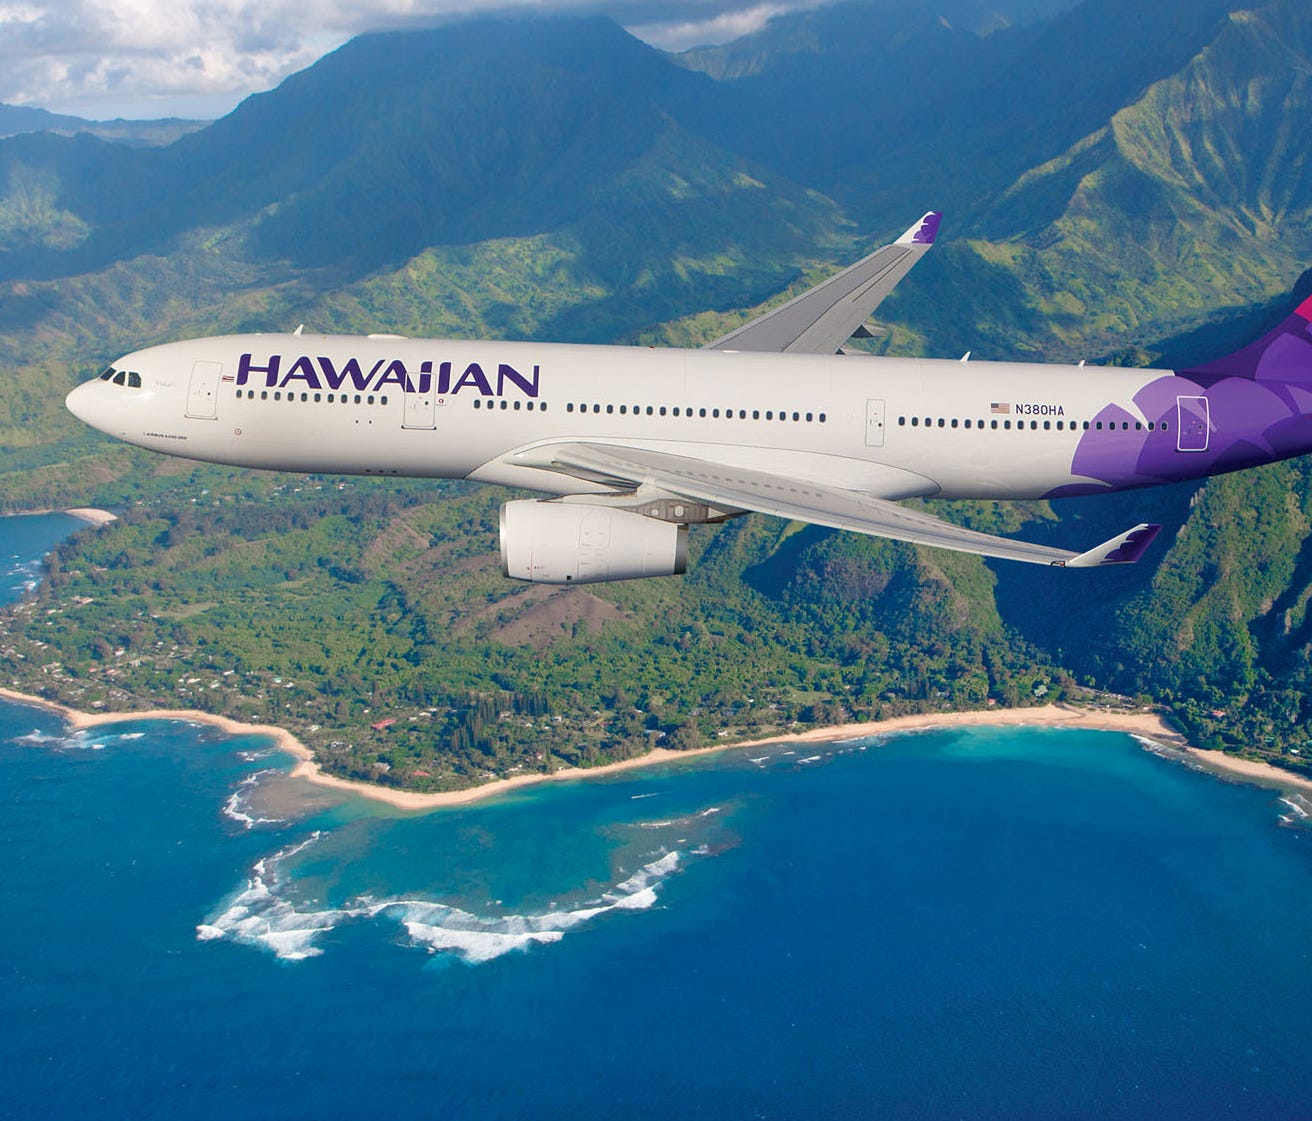 A 2011 photo from Hawaiian Airlines shows a plane above Hawaii.